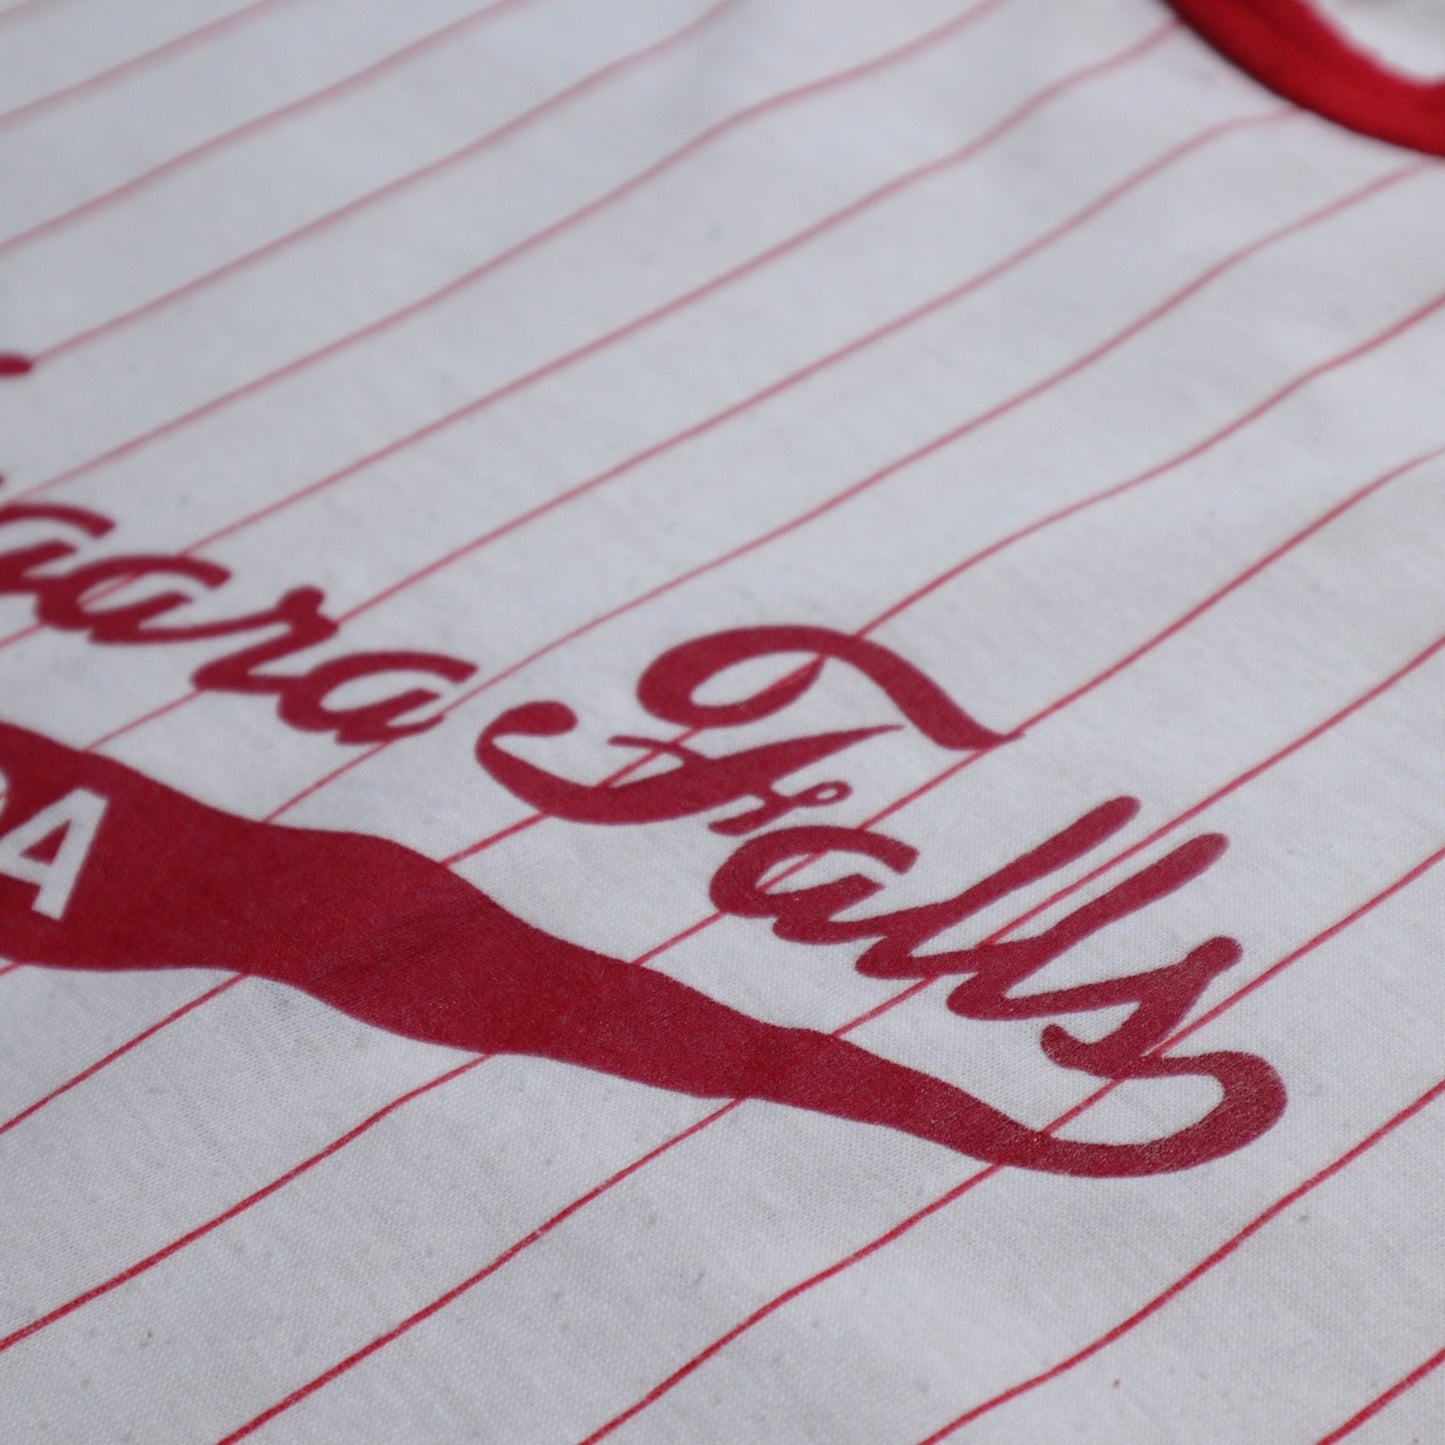 70-80s Canadian-made Niagara Falls red and white striped 7-quarter sleeve baseball top